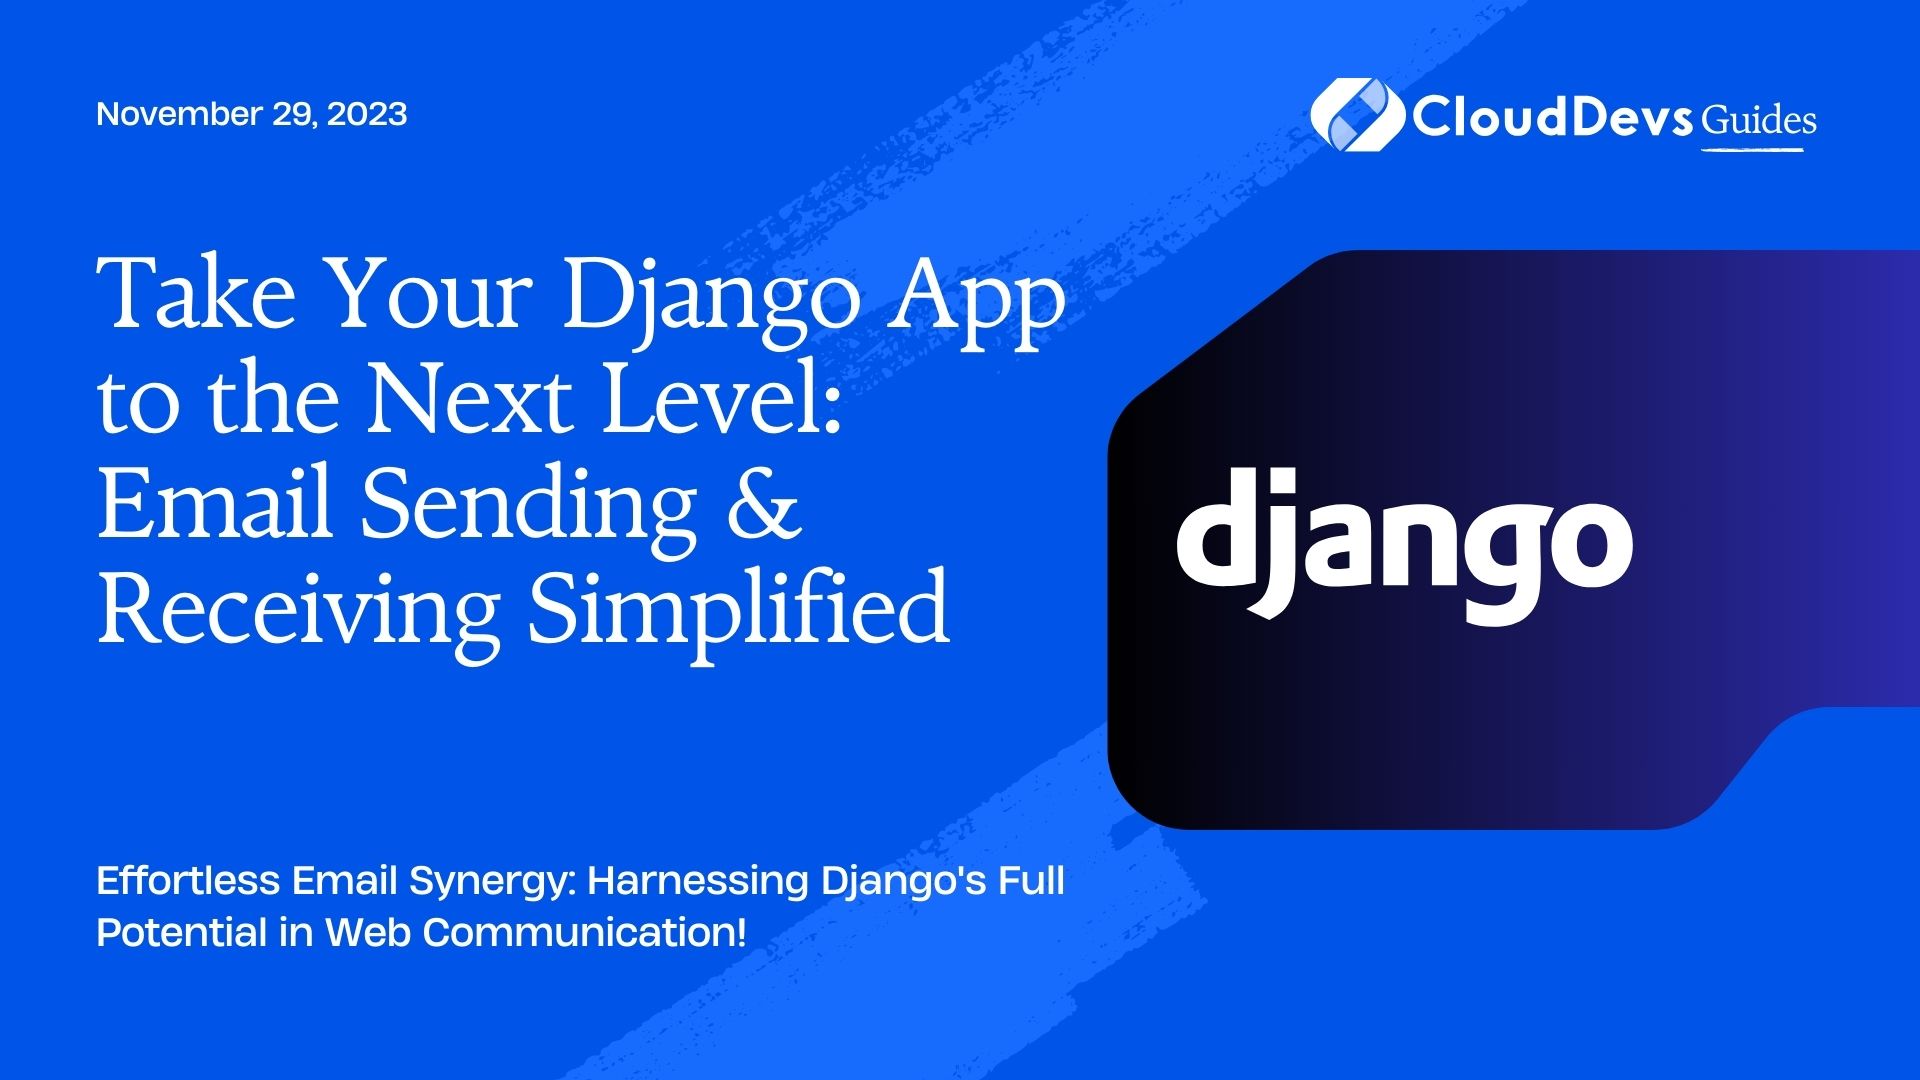 Take Your Django App to the Next Level: Email Sending & Receiving Simplified